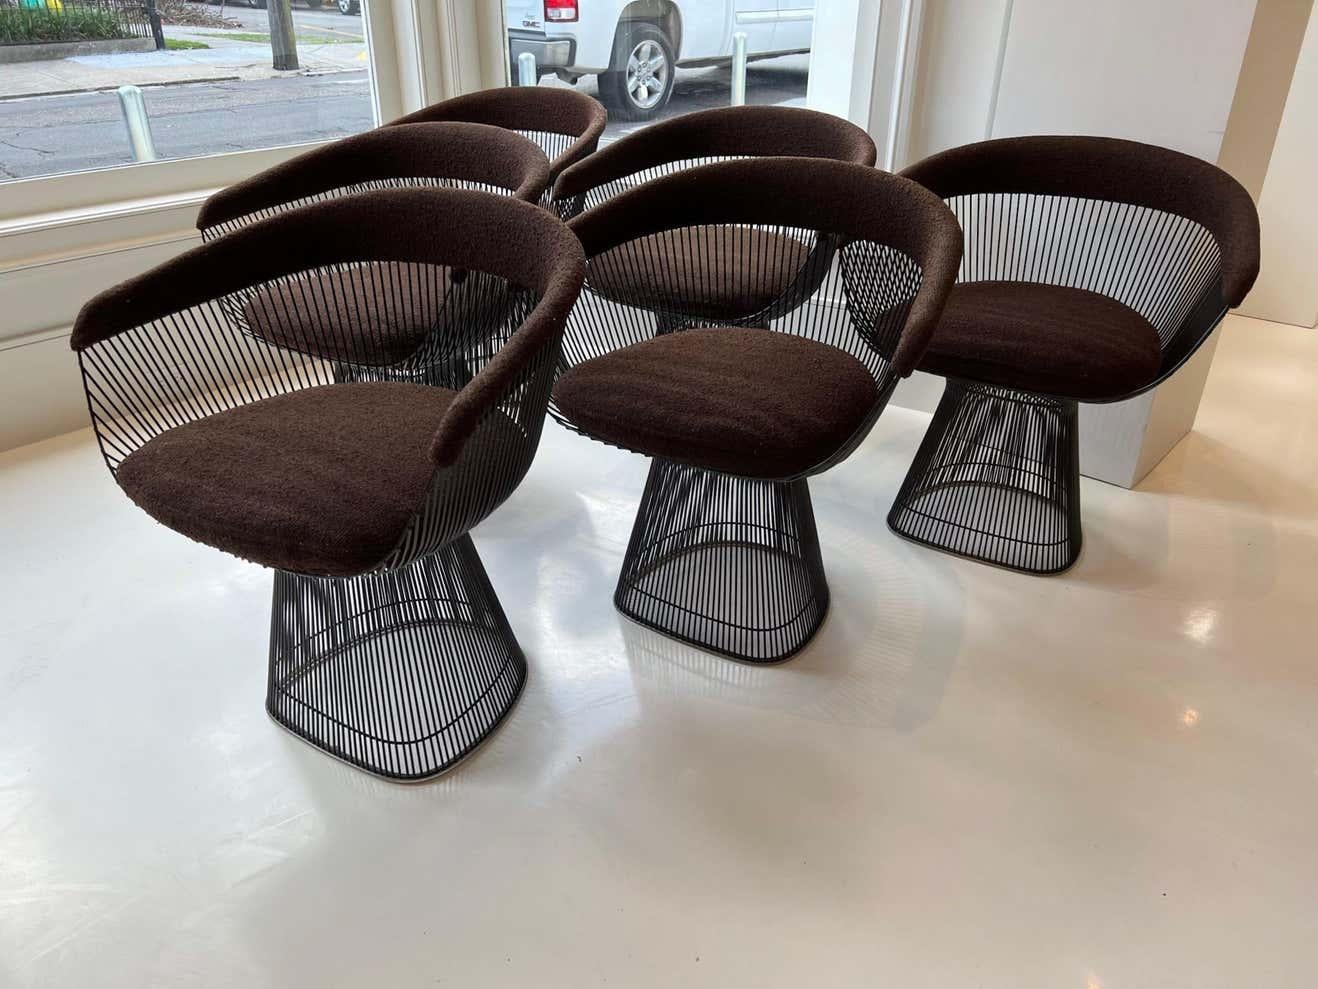 Platner chairs set of 6 iron and fabric by Warren Platner for Knoll, 1970s. The armchair, which can be used as a dining chair or guest chair, is created by welding curved steel rods to circular and semi-circular frames, simultaneously serving as